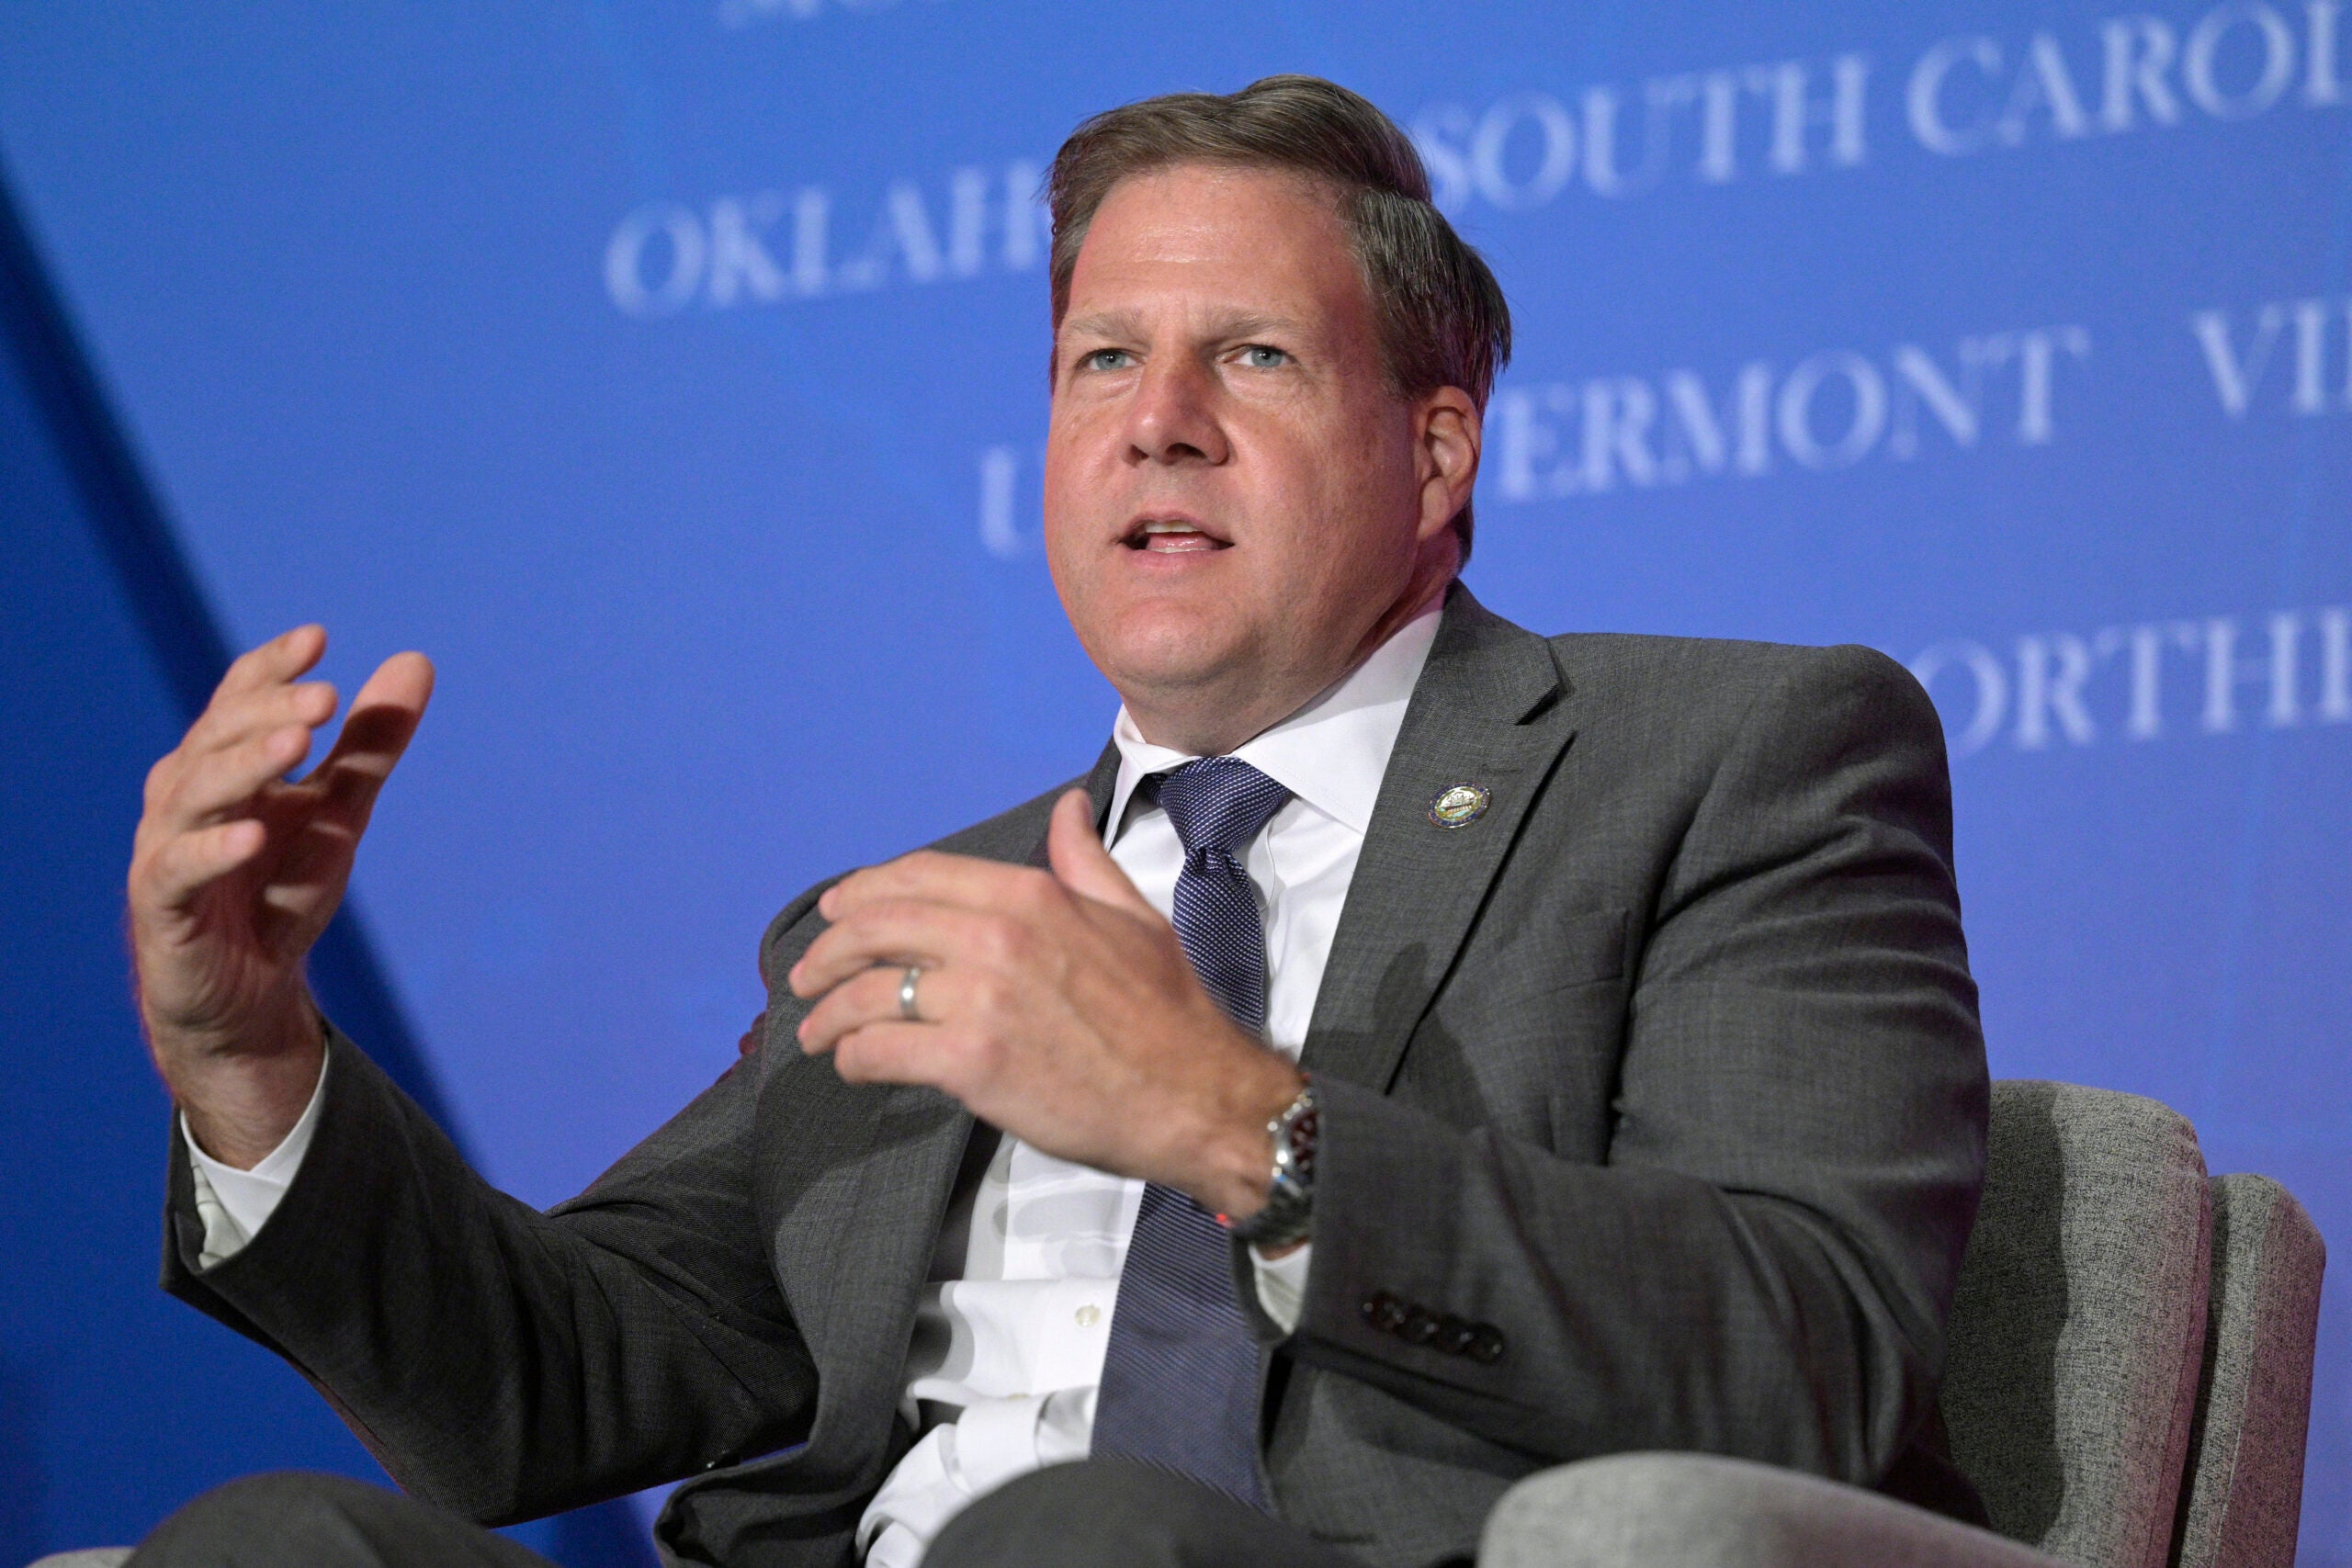 New Hampshire Governor Chris Sununu speaks at a convention.